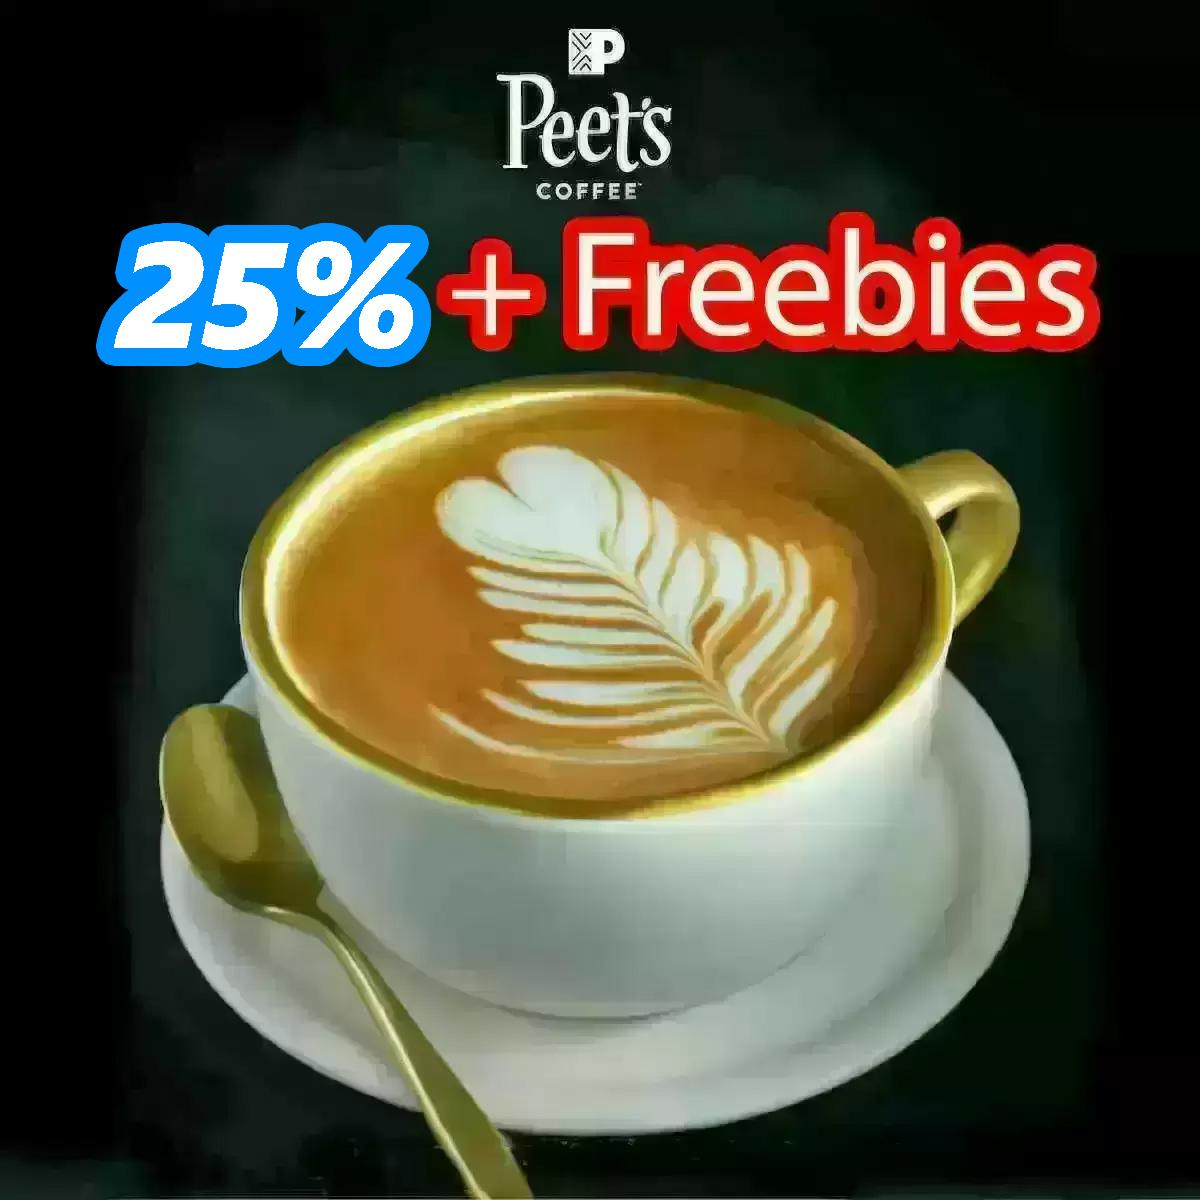 How to Get a 25% Off Discount at Peets Coffee